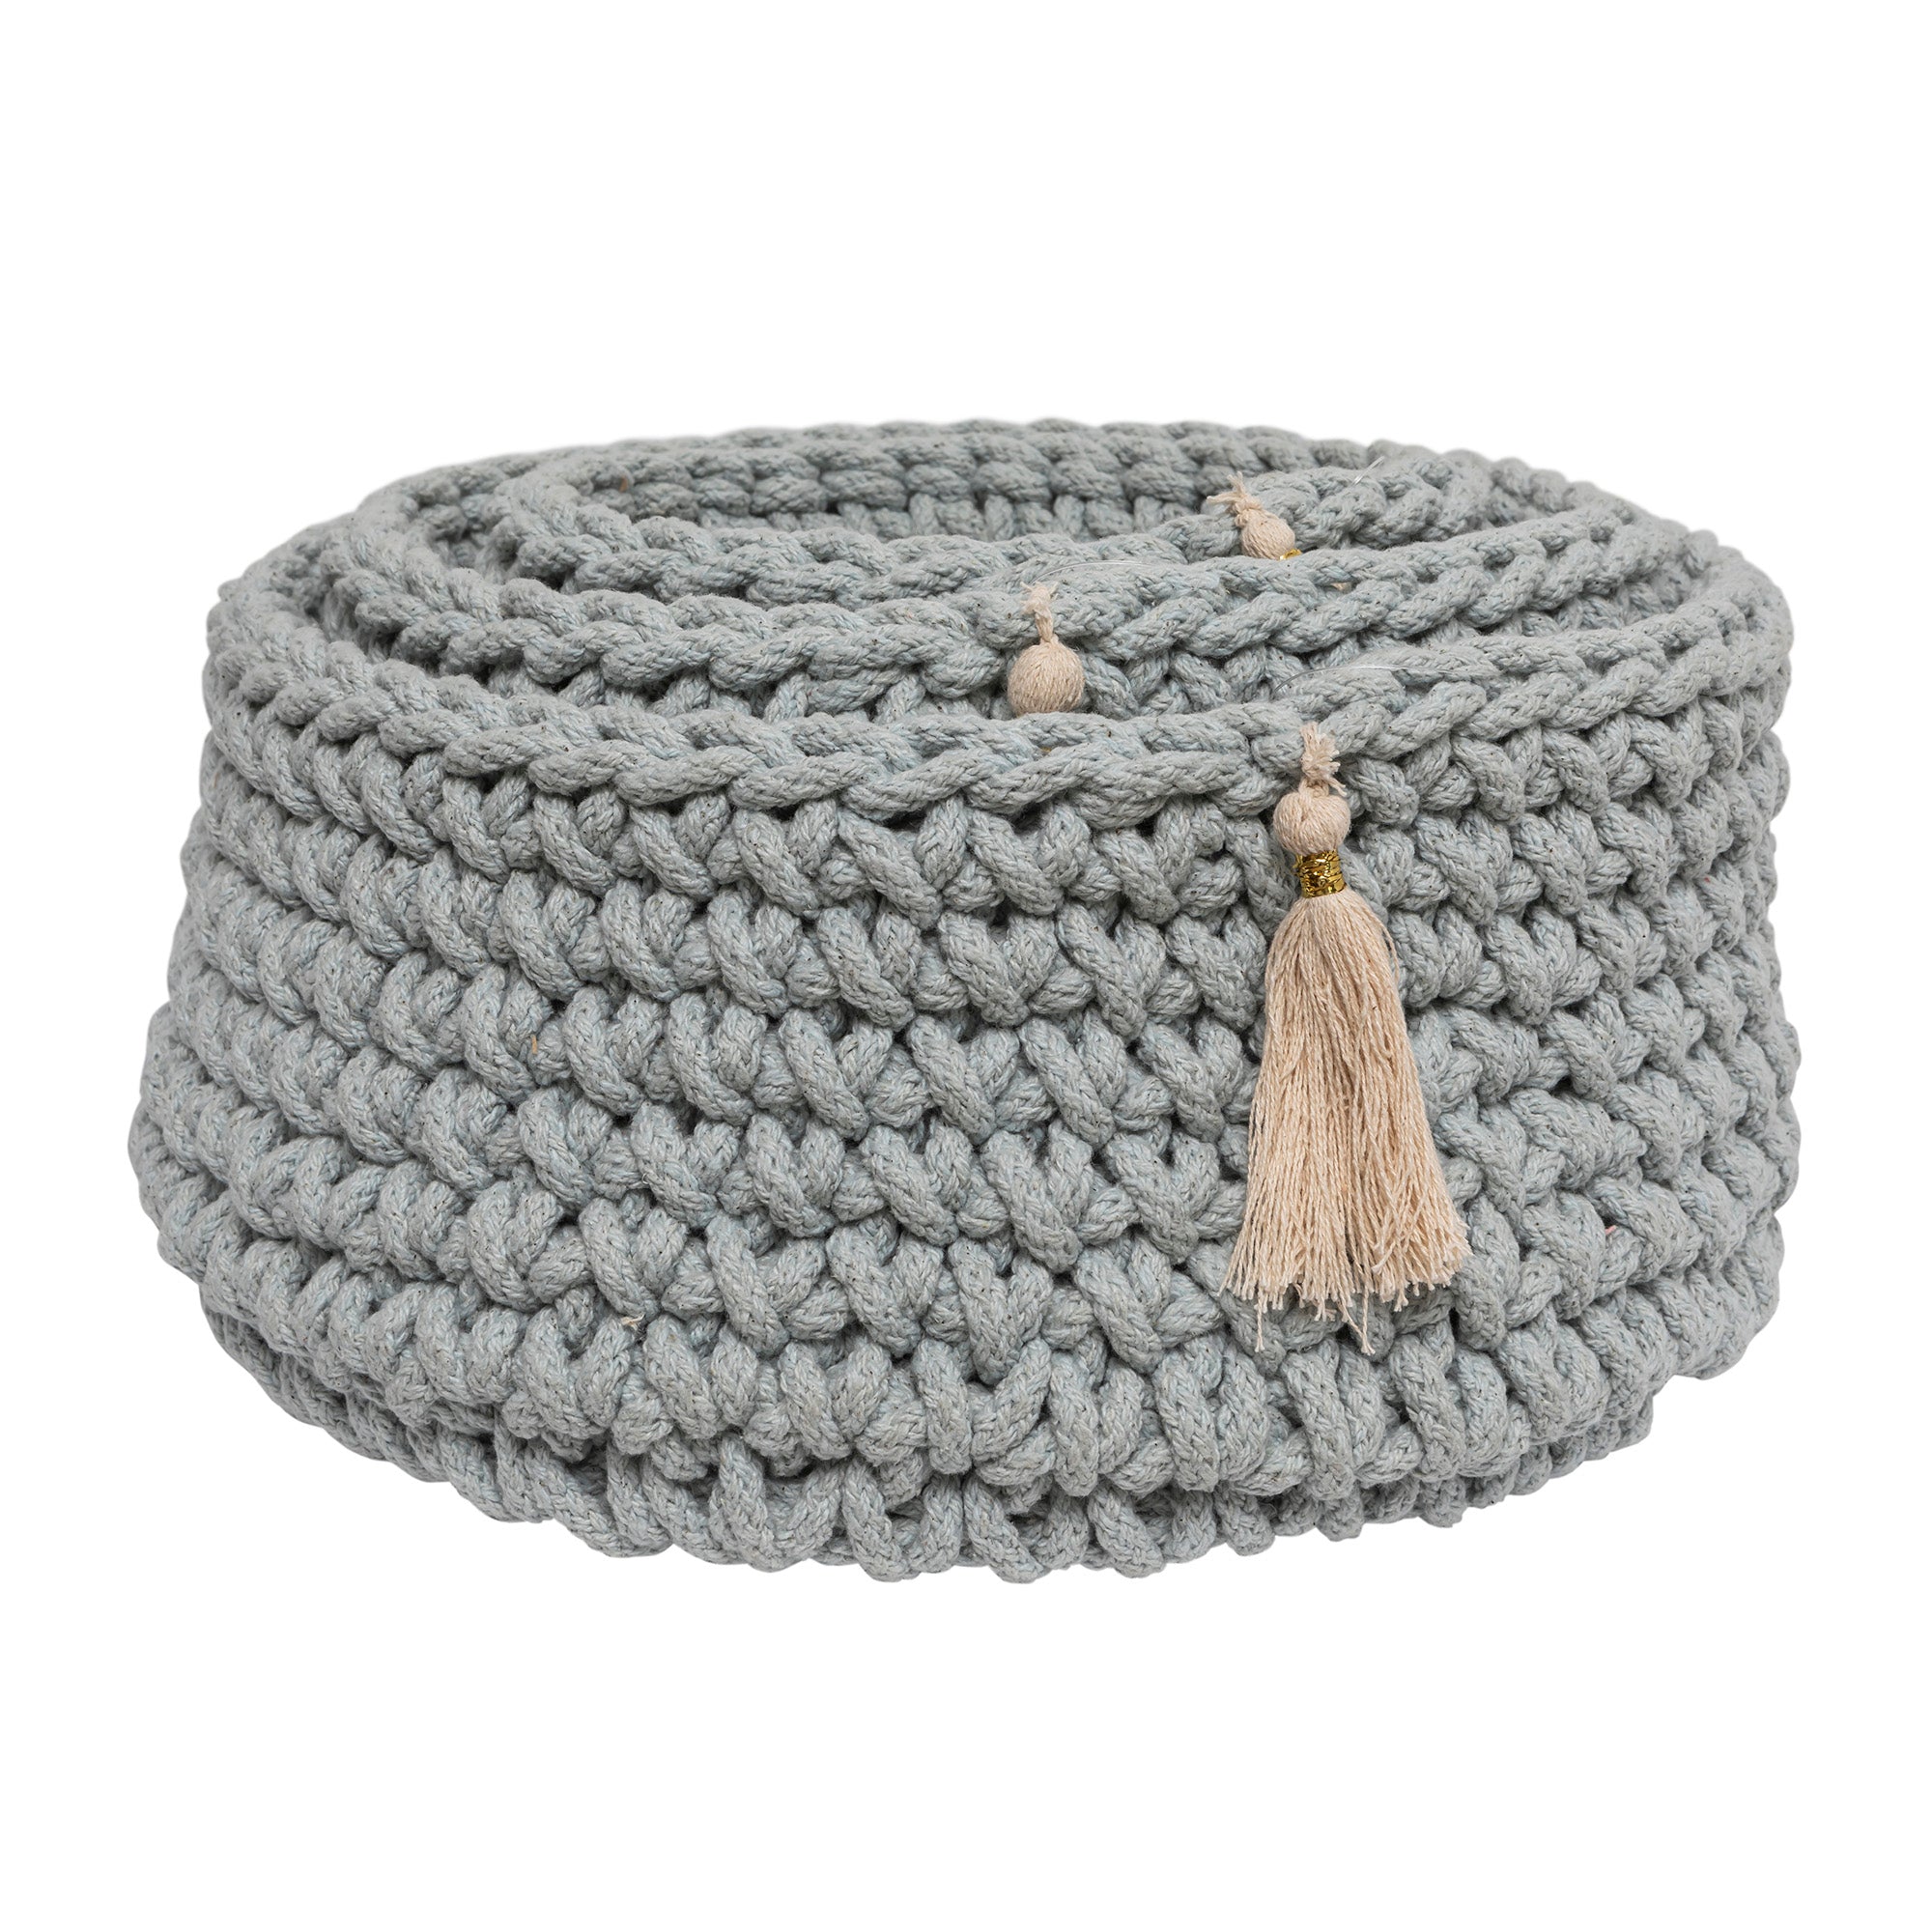 3 nesting baskets made of a rope weave of light blue with cream tassels